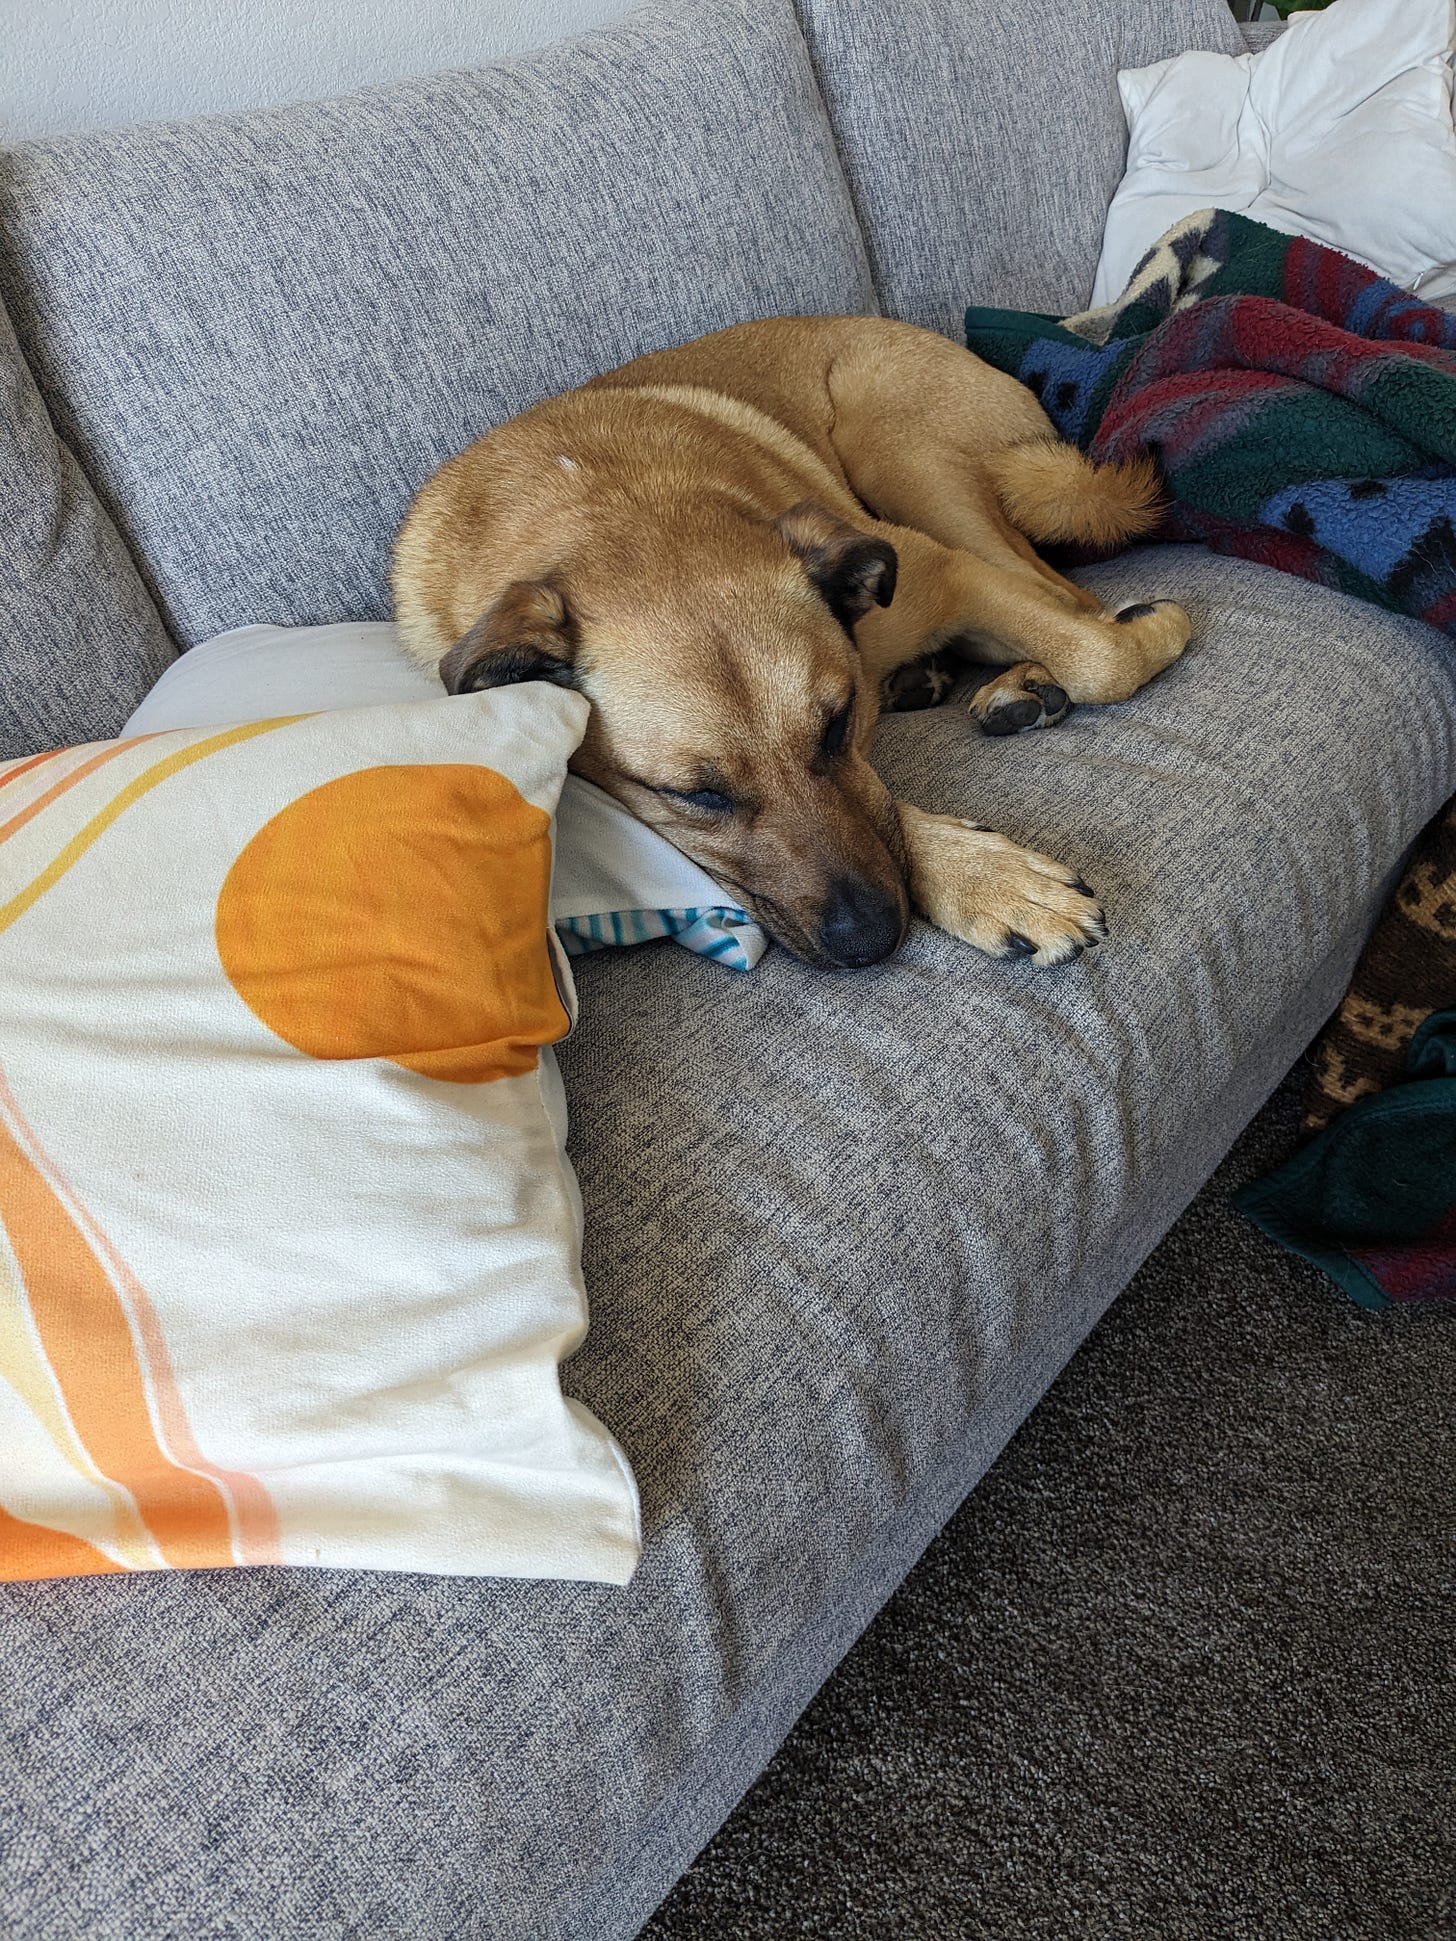 Dog sleeping on couch surrounded by throw pillows and blankets